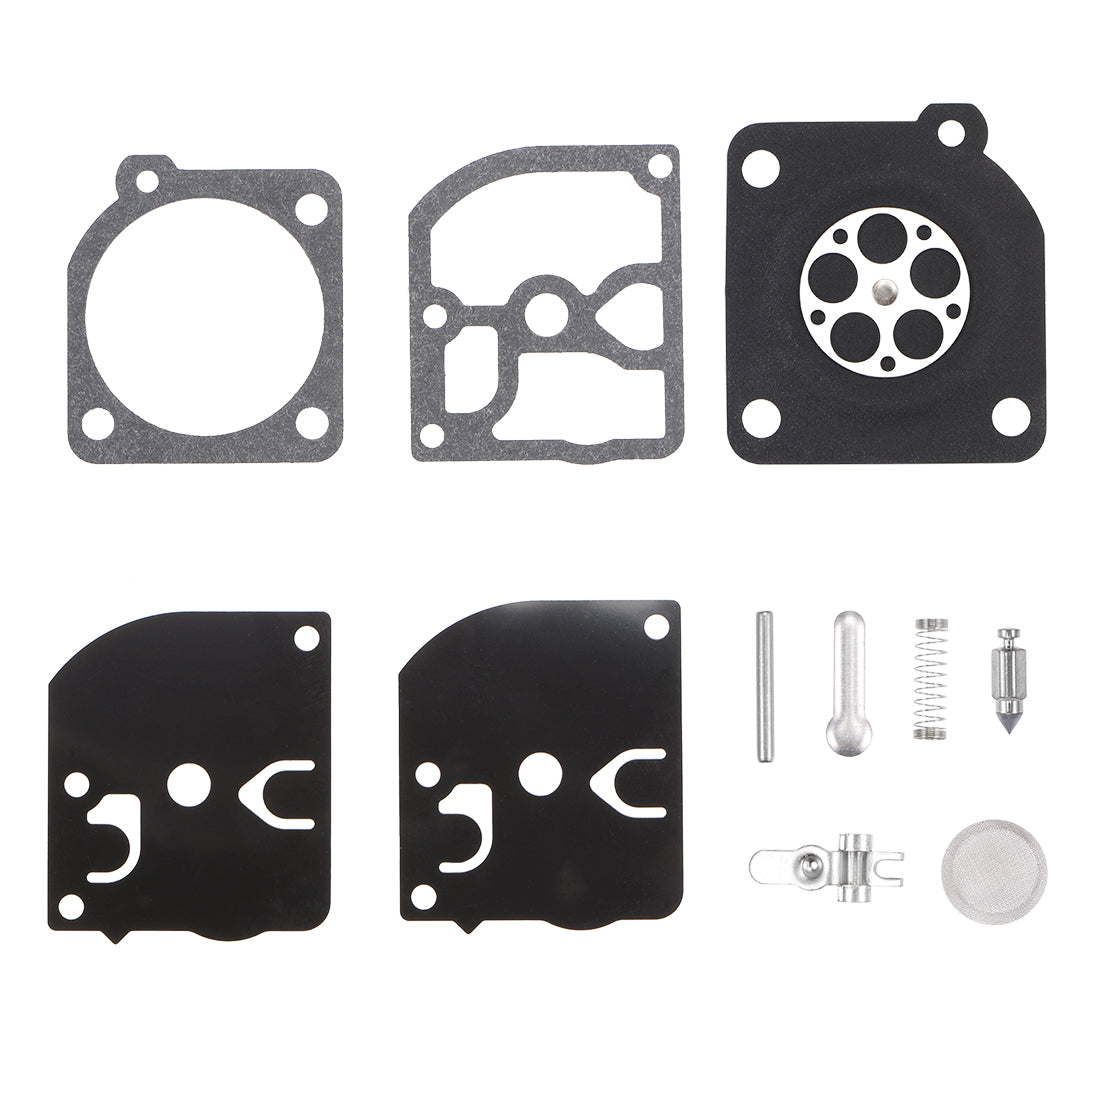 uxcell Uxcell Carburetor Rebuild Kit Gasket Diaphragm RB-39 for McCulloch Eager Beaver 2010 2014 2016 2116 2118 2316 3210 35cc 32cc Chainsaw Engines Carb 2pcs